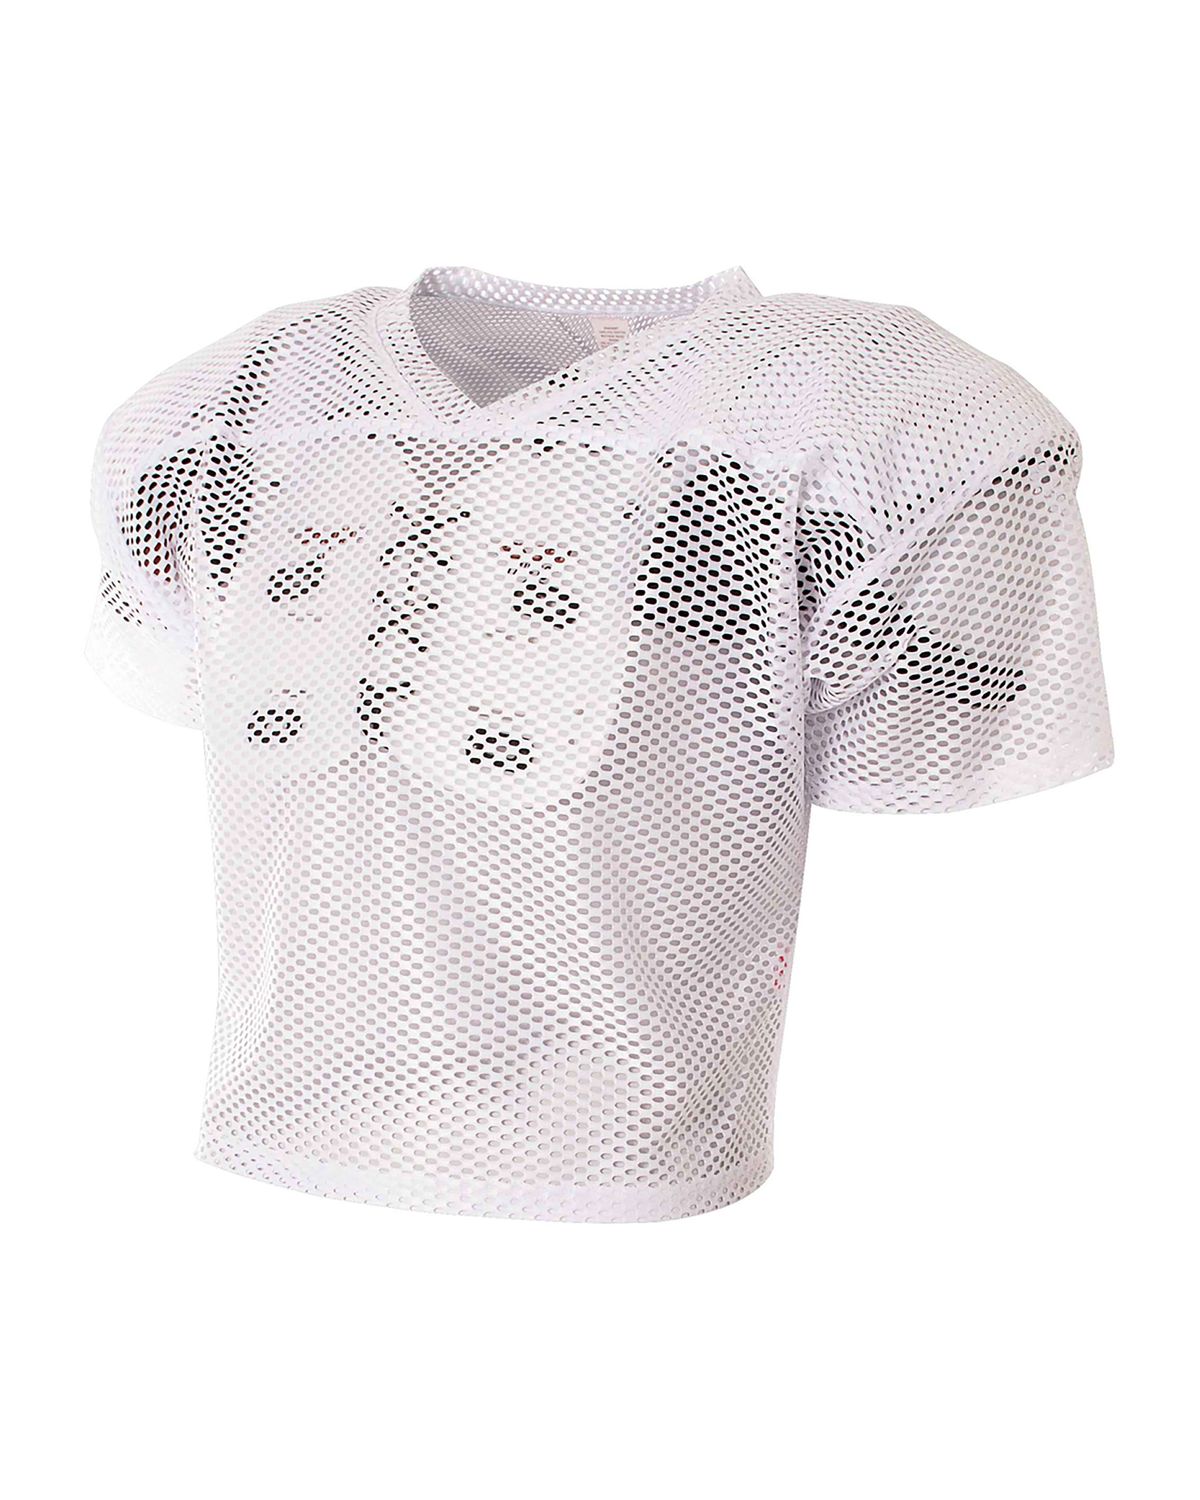 A4 N4190 Porthole Mesh Practice Football Jersey